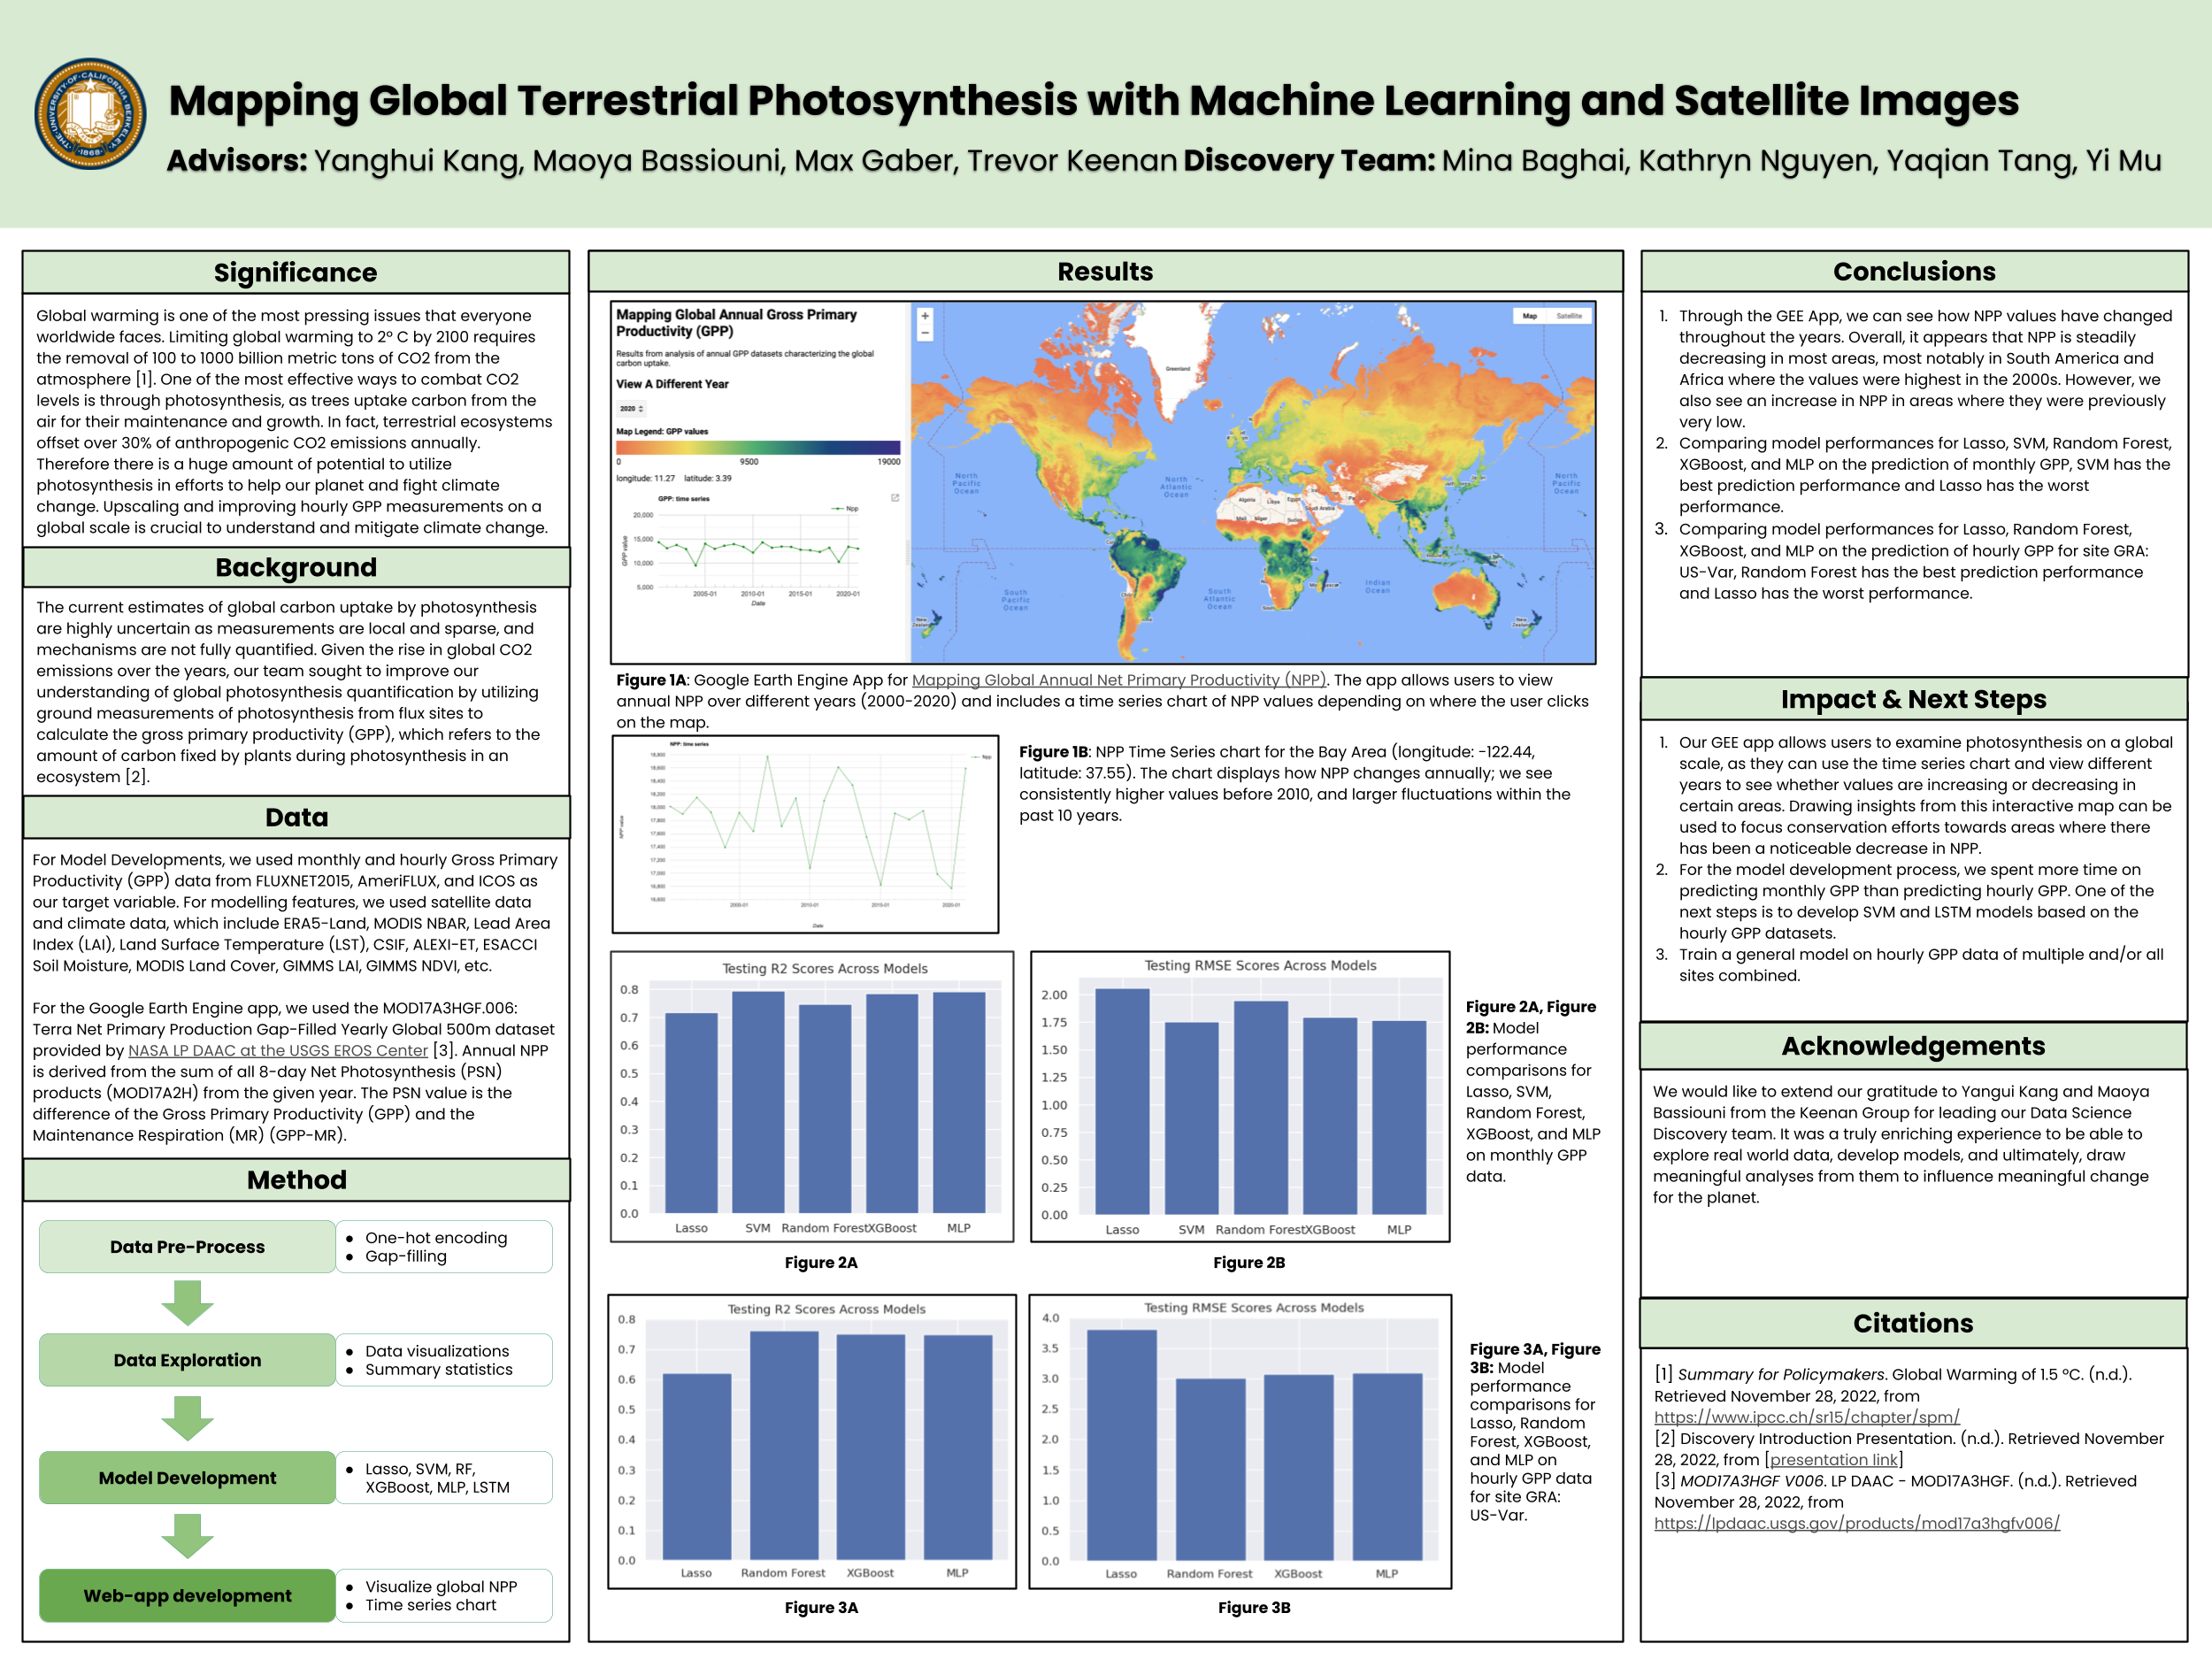 Mapping Global Terrestrial Photosynthesis with Machine Learning and Satellite Images - Fall 2022 Discovery Project